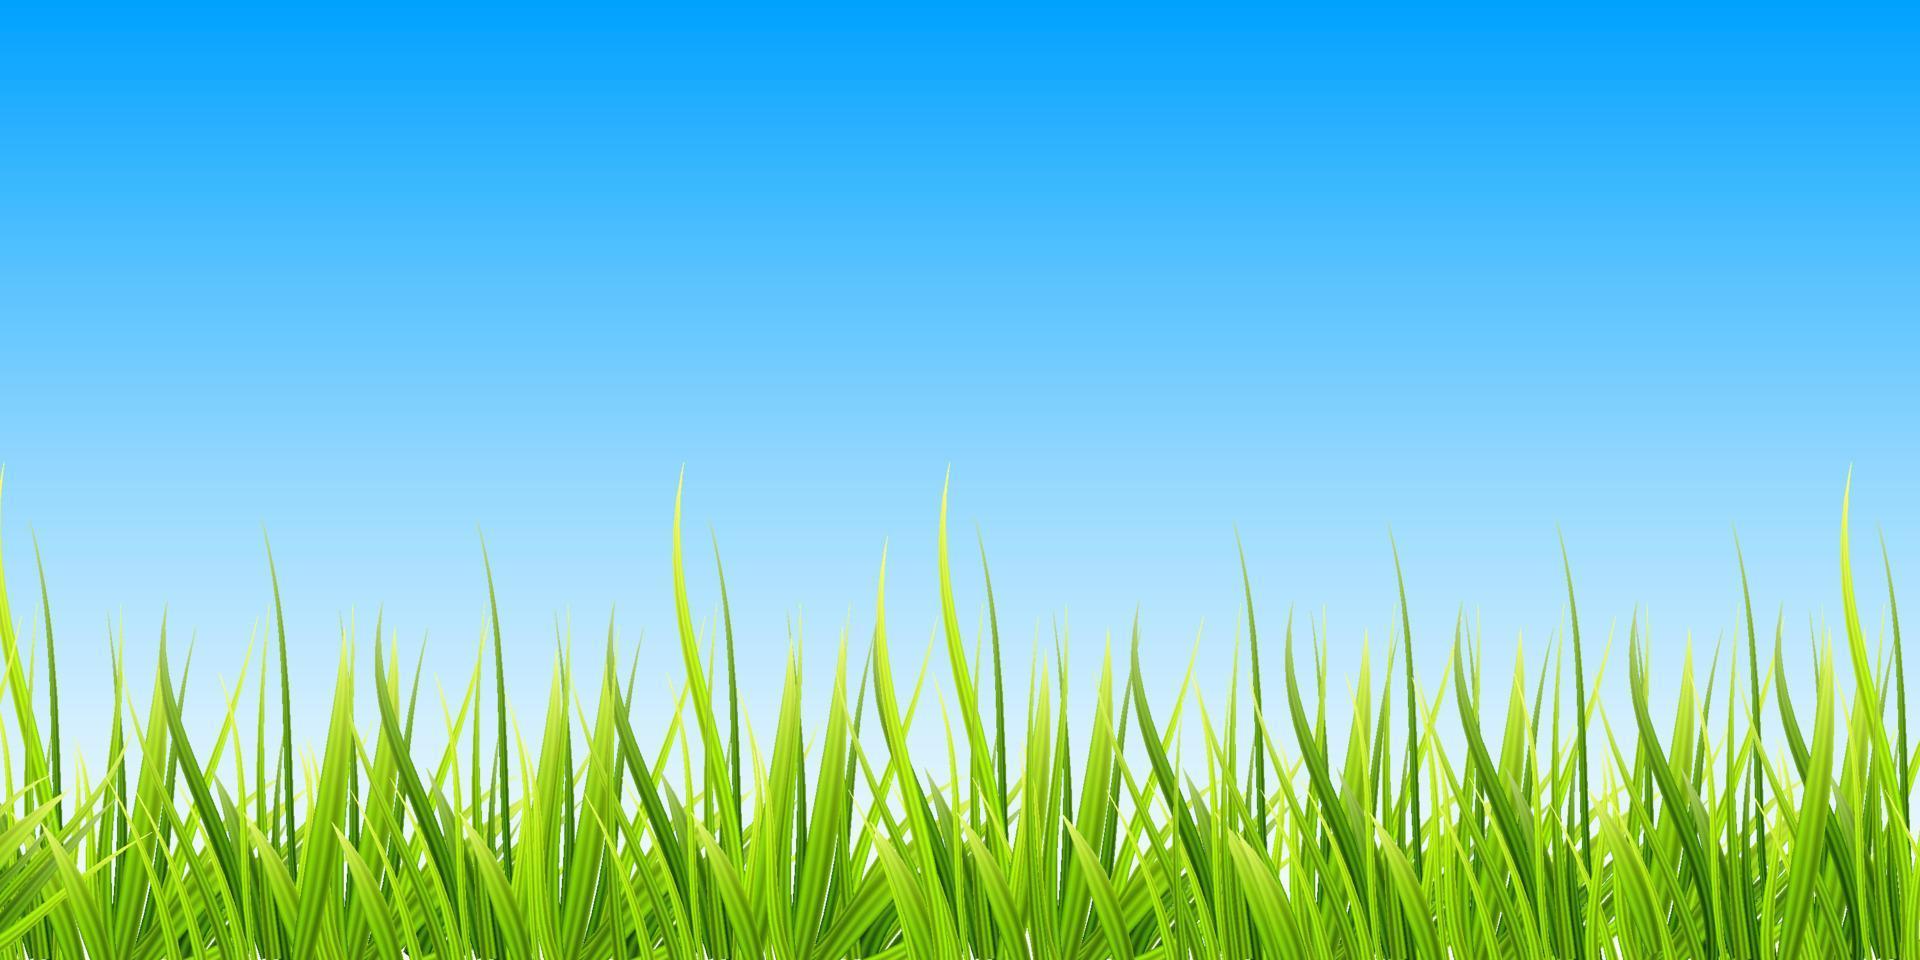 Realistic sunrise over a field of grass. Natural panoramic with blue sky and grassy meadow. Vector illustration